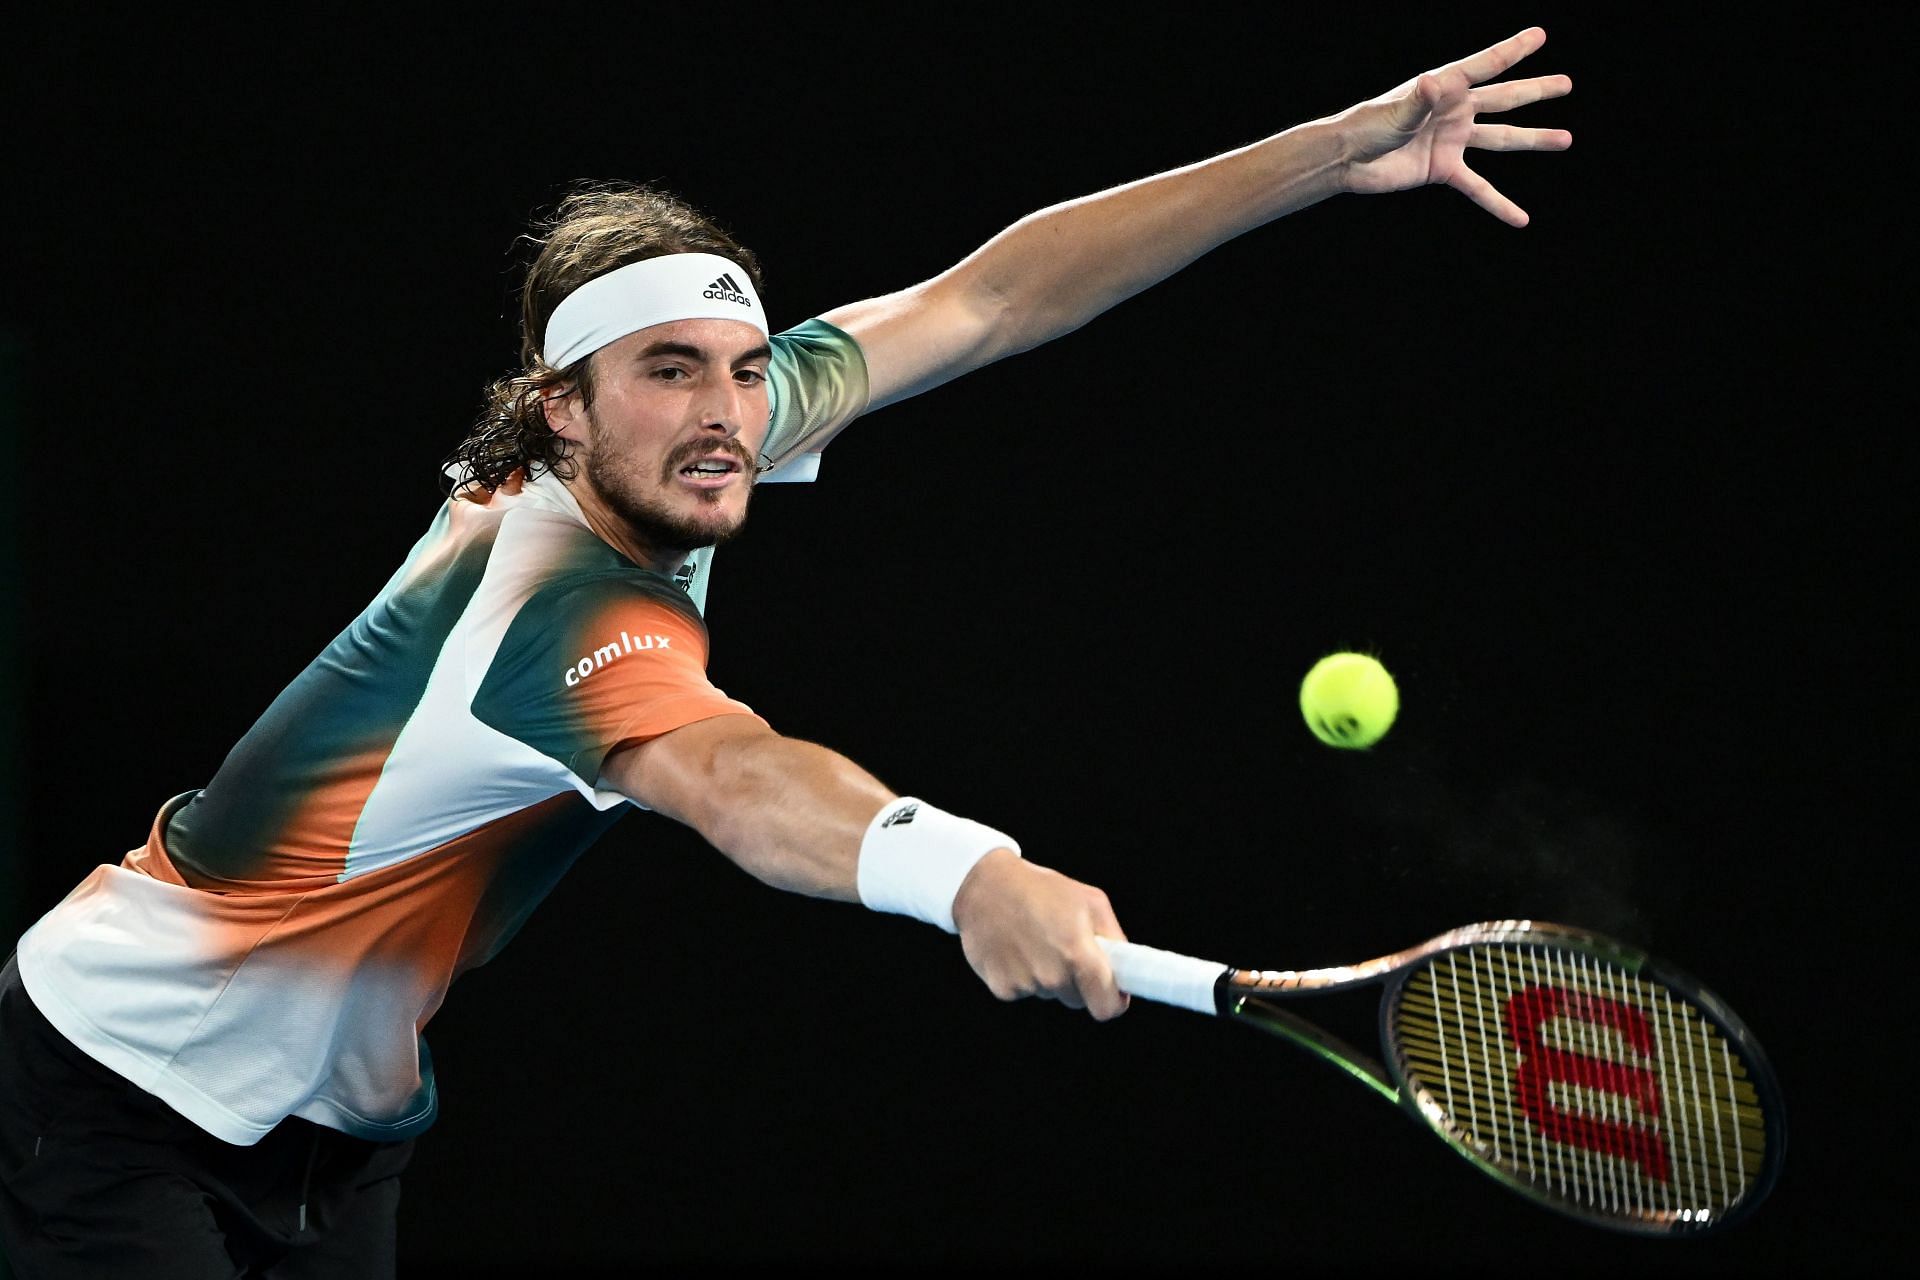 Stefanos Tsitsipas is the top seed at ABN Amro World Tennis Tournament.